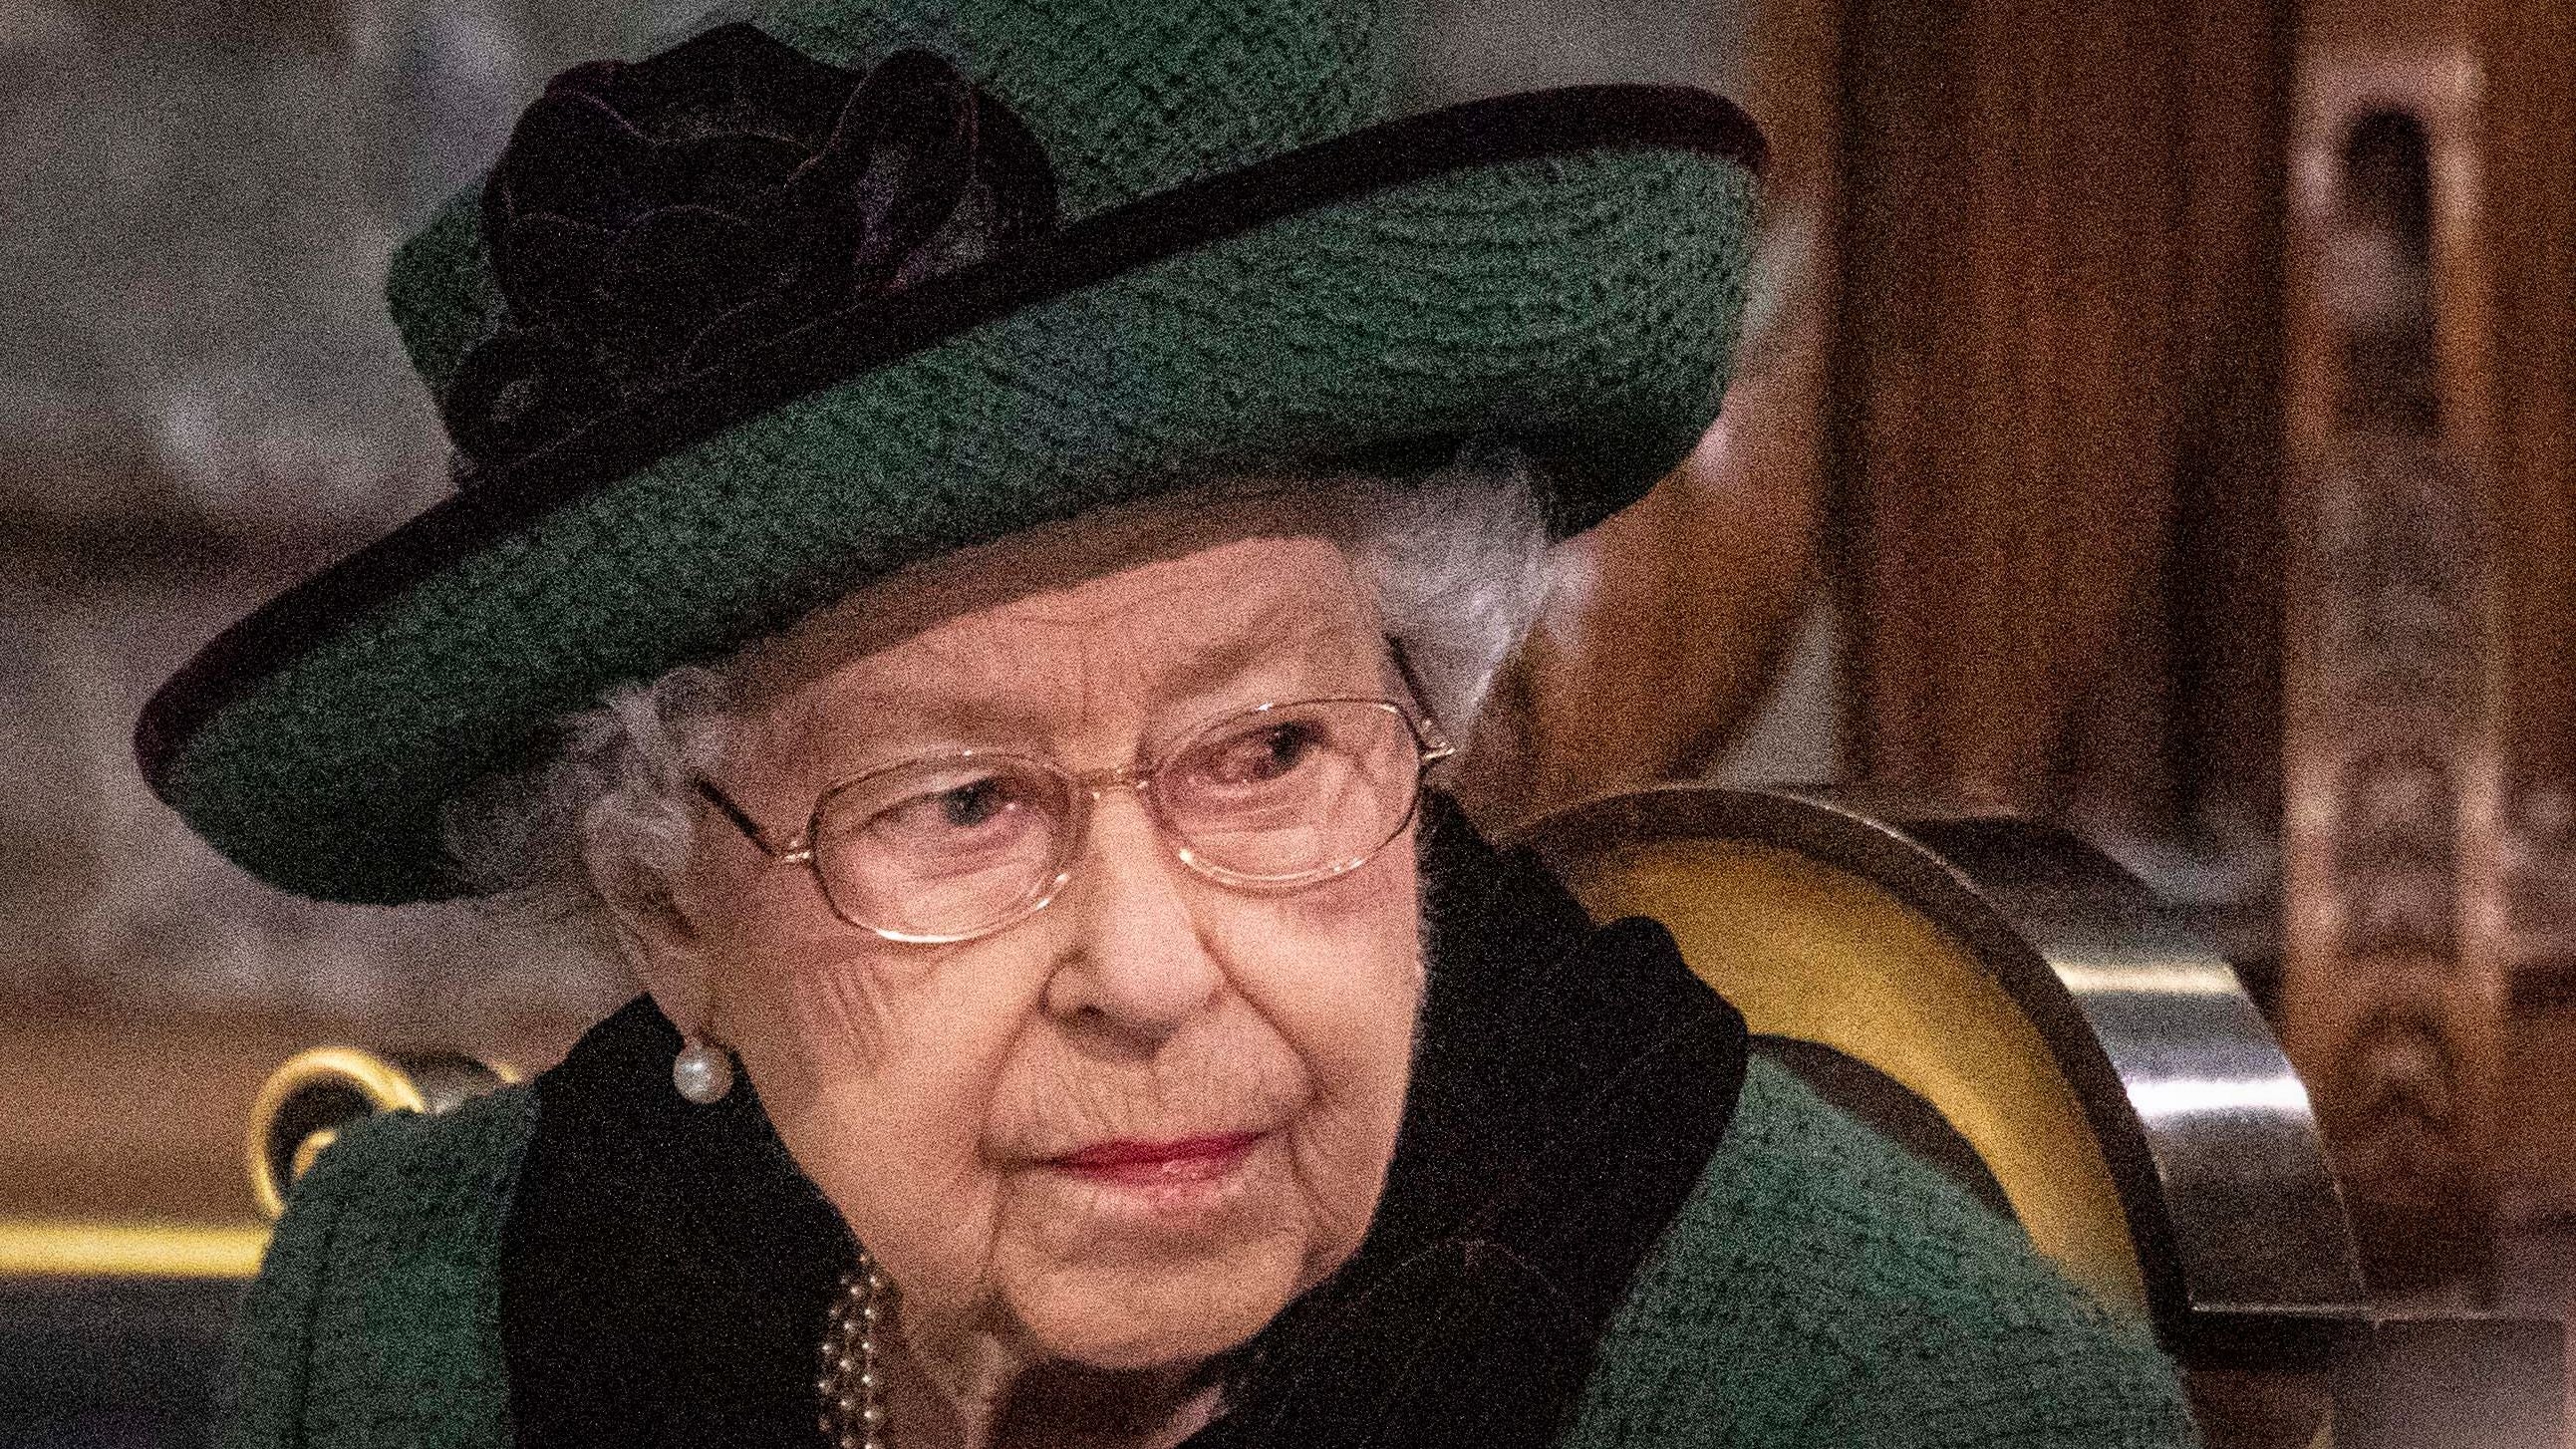 The Queen won’t be giving the speech today due to mobility issues